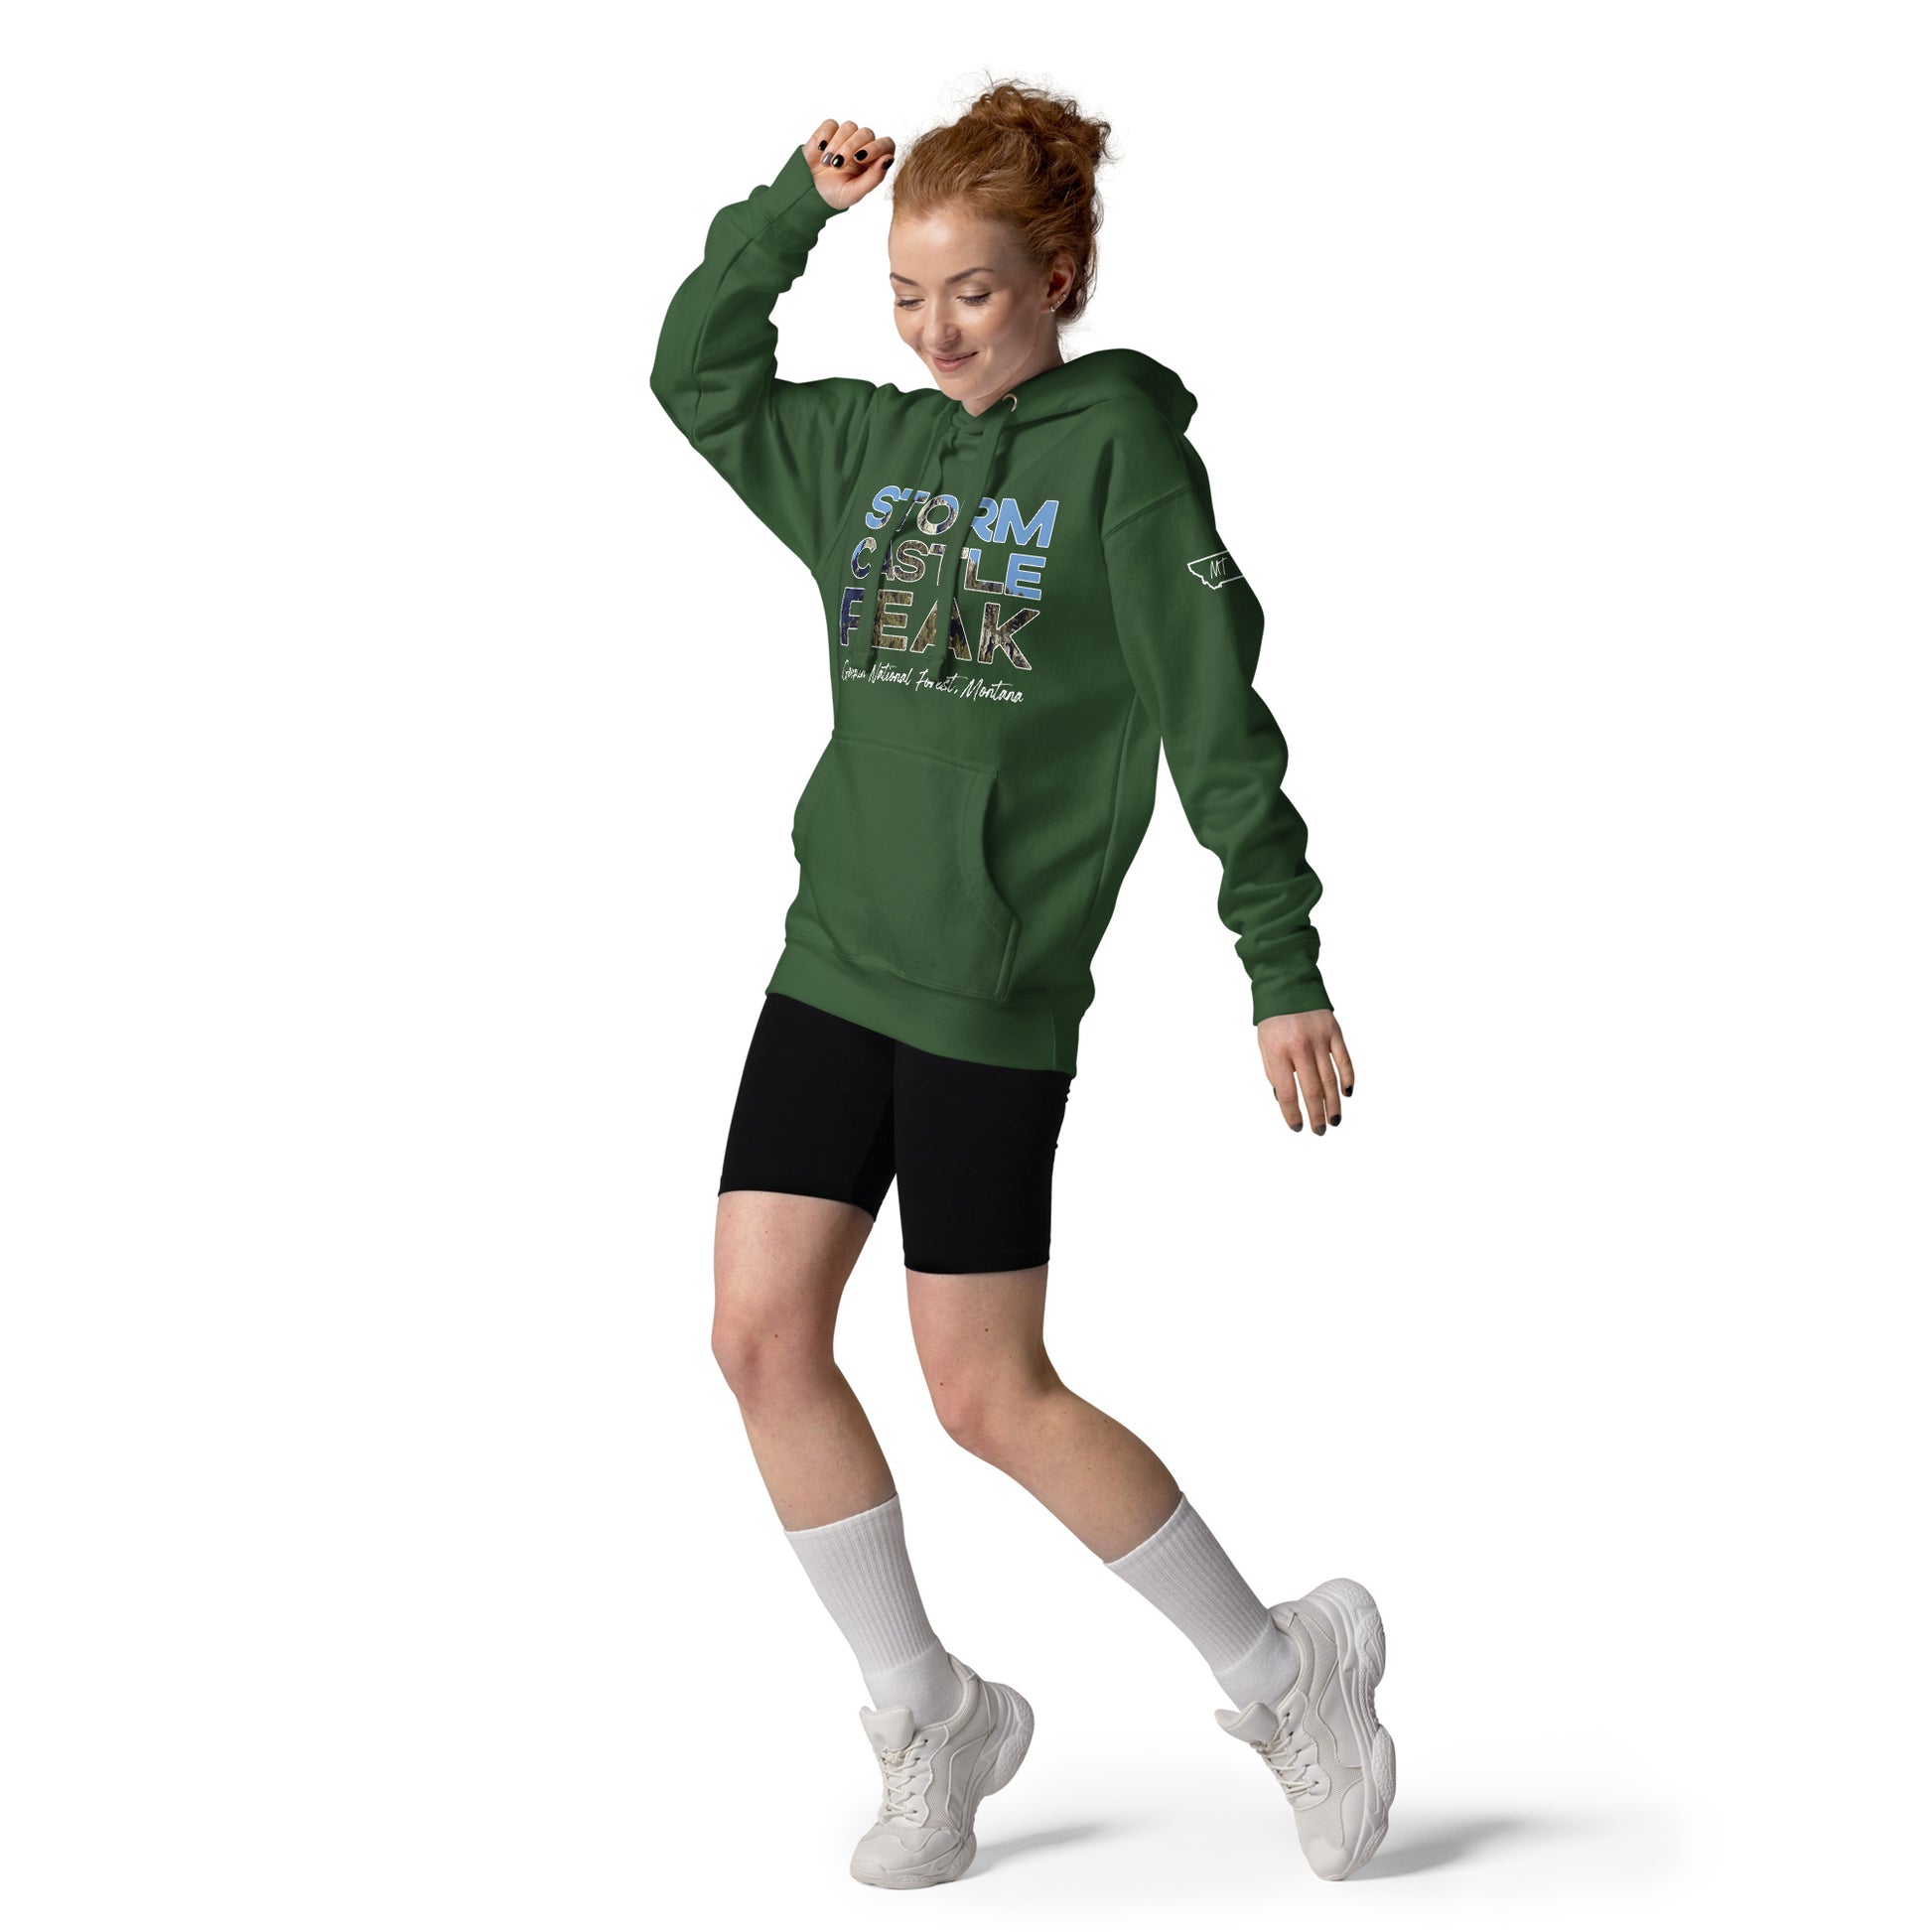 Front-Side view of Storm Castle Peak in Custer Gallatin National Forest Montana Forest Green Women's Hoodie from Park Attire